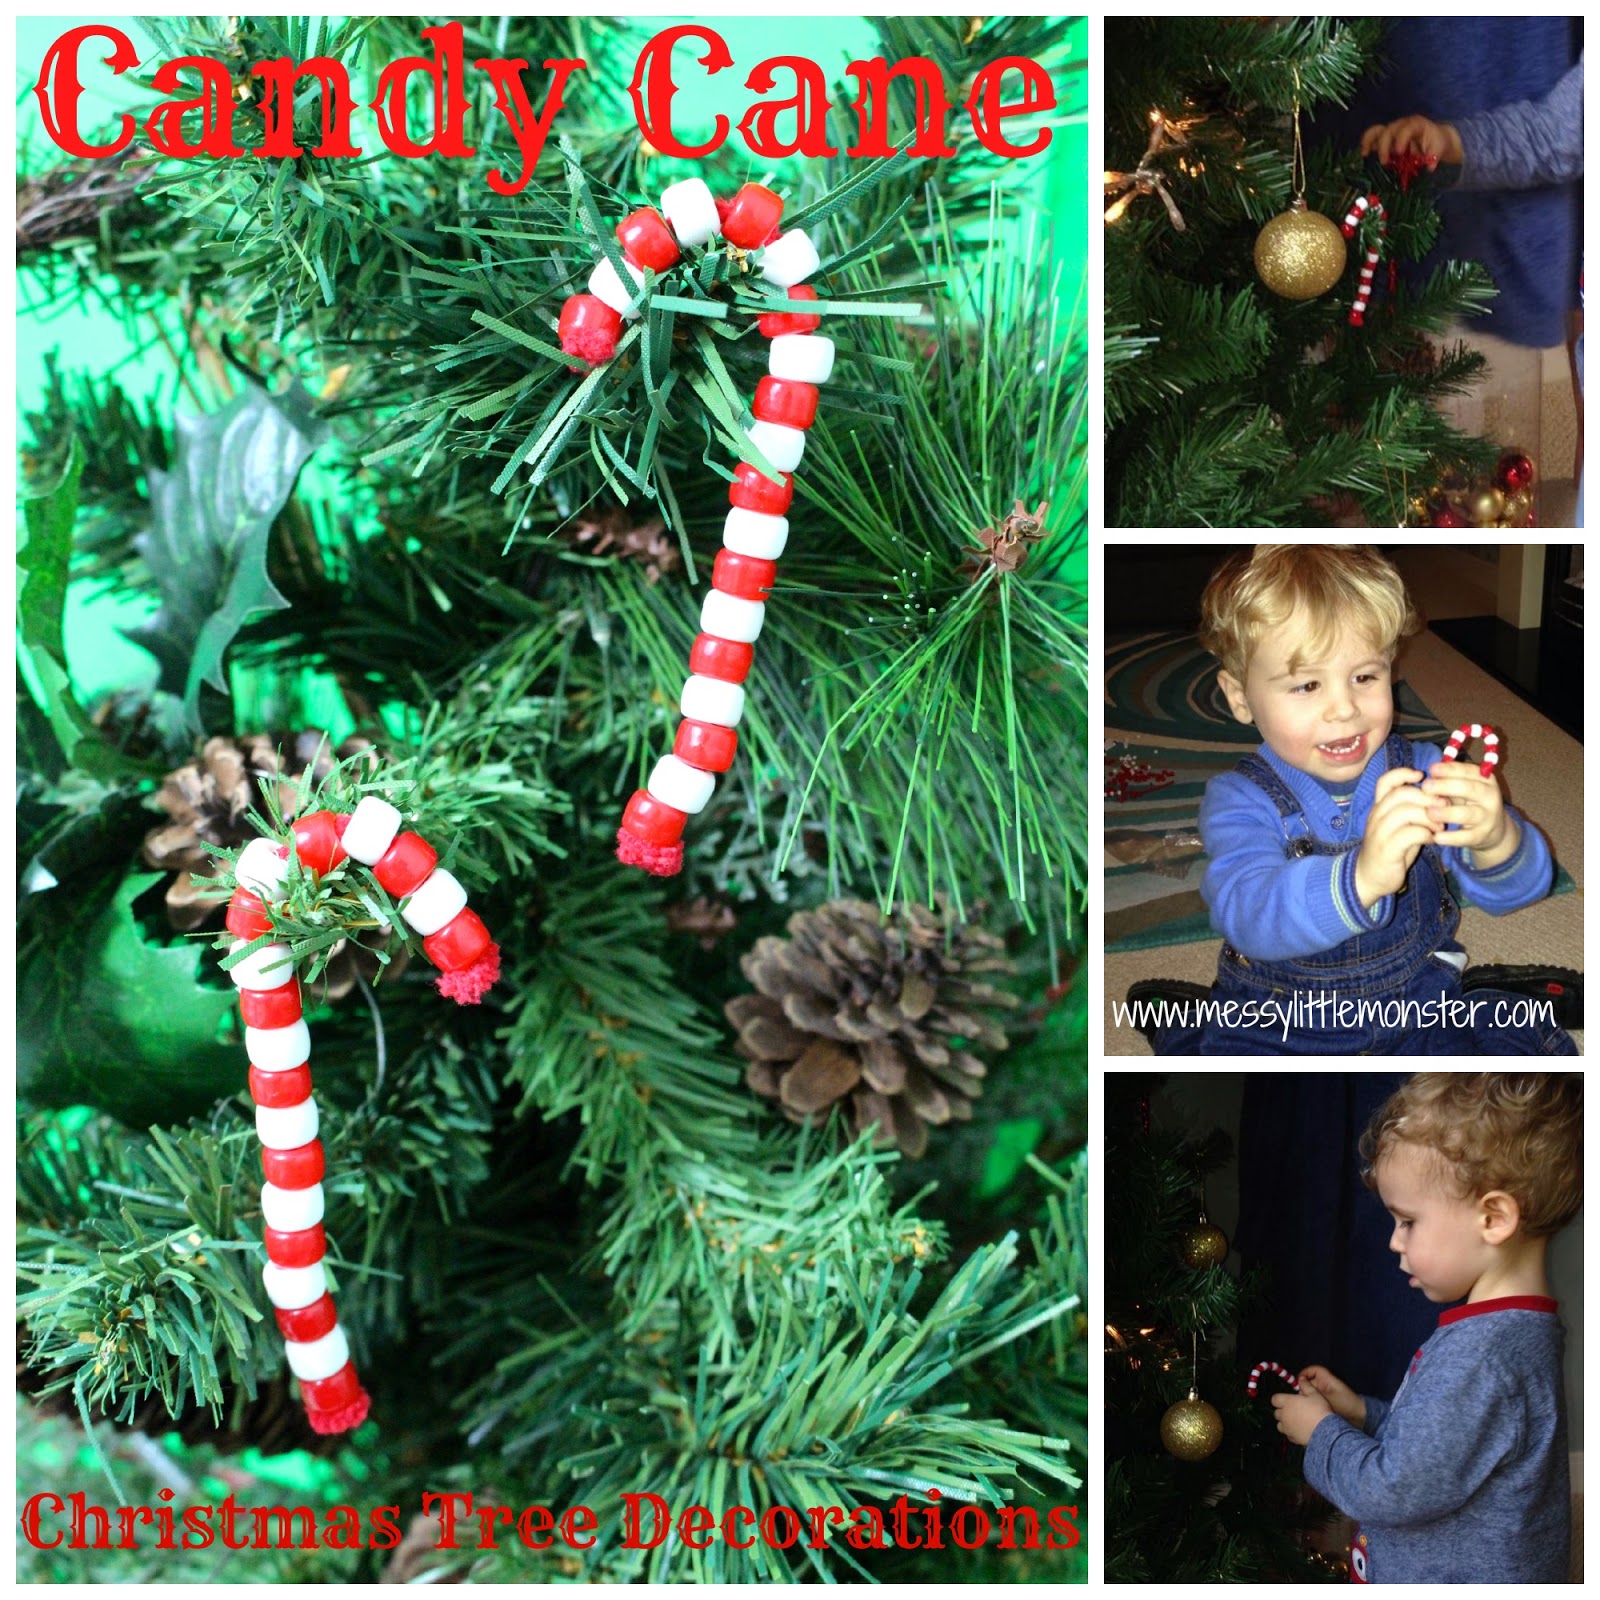 Candy Cane Christmas Tree Decorations - Messy Little Monster